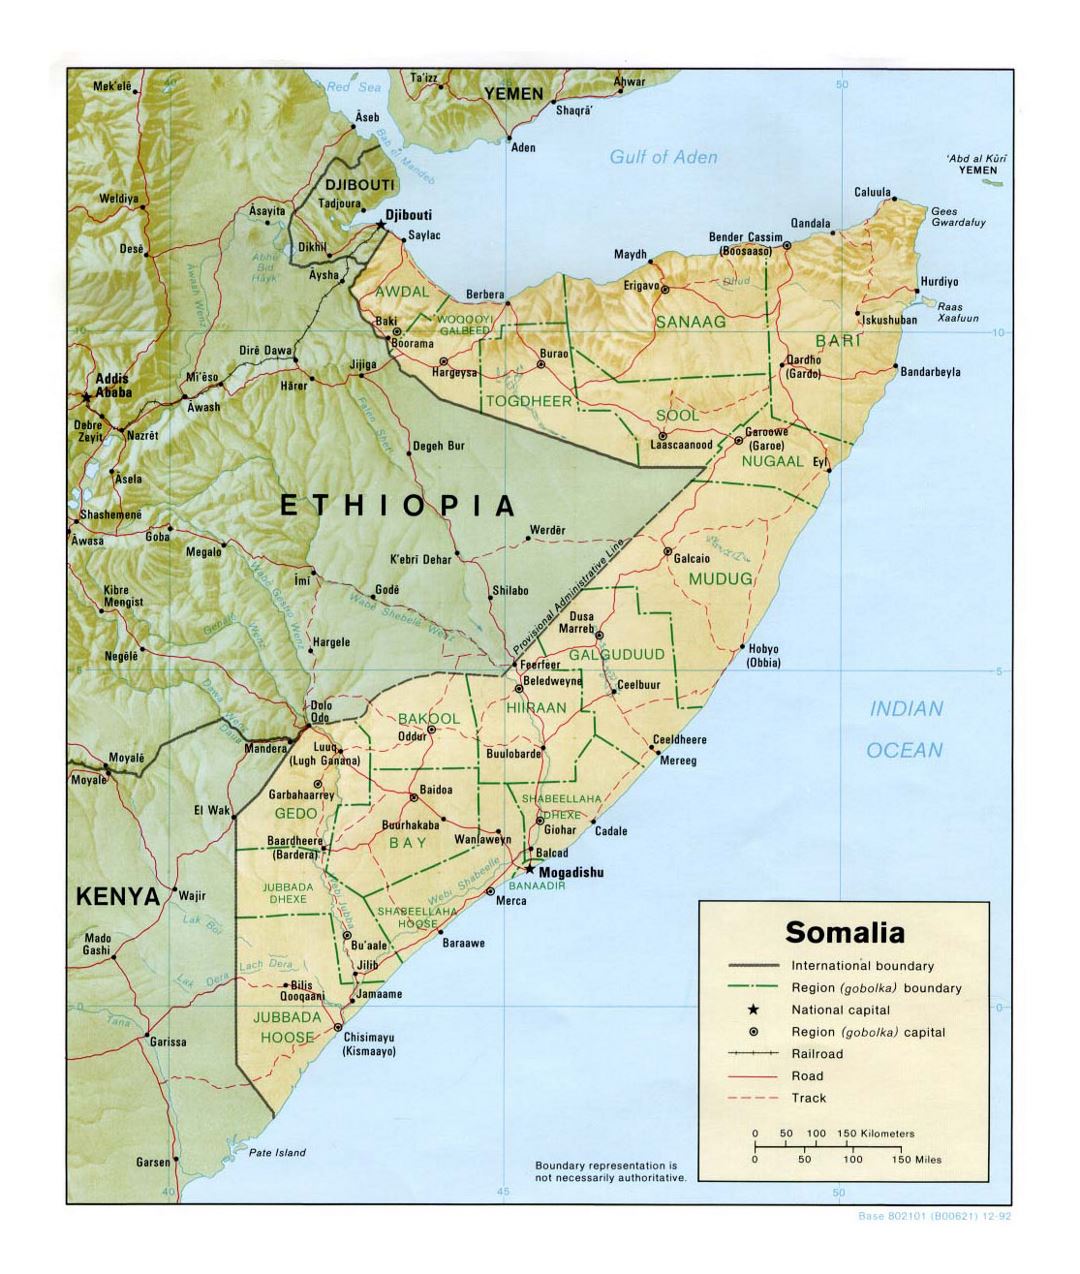 Detailed political and administrative map of Somalia with relief, roads, railroads and major cities - 1992